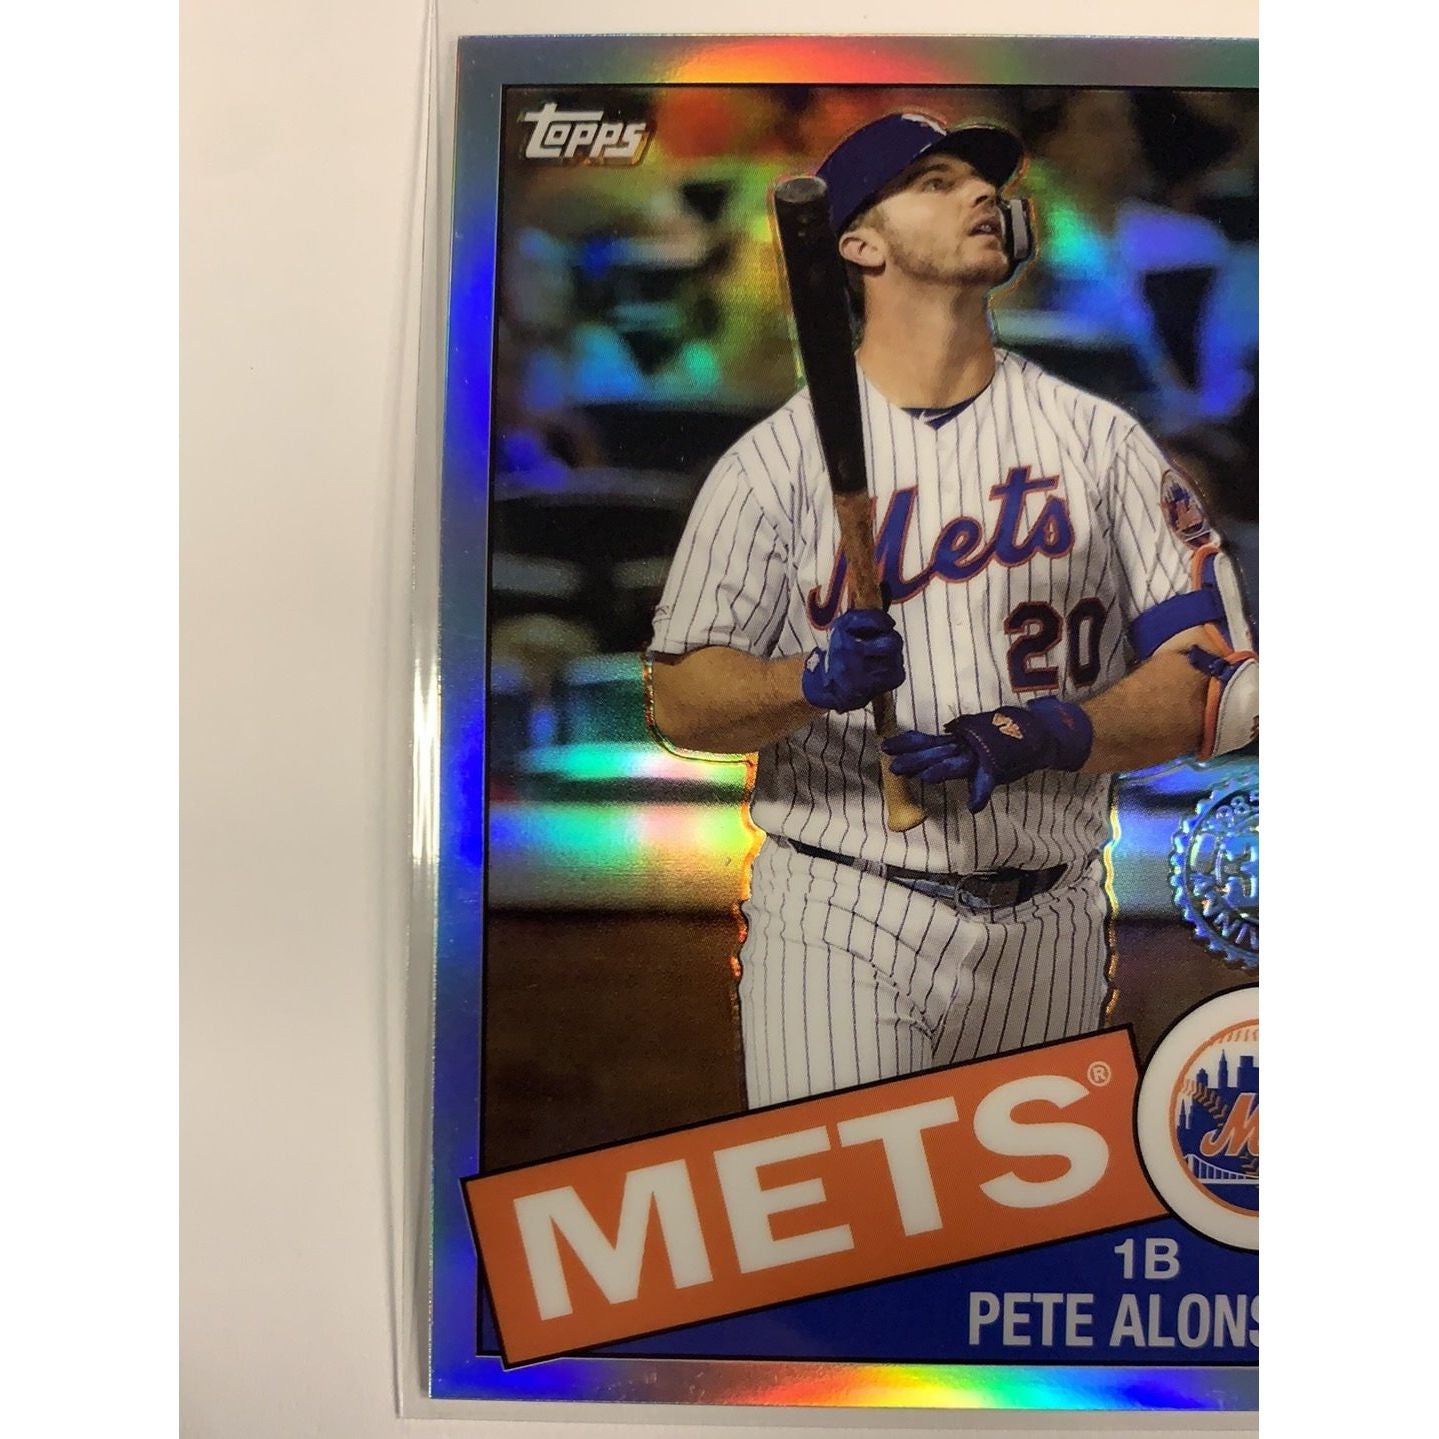  2020 Topps 35th Anniversary Pete Alonso Chrome Refractor  Local Legends Cards & Collectibles